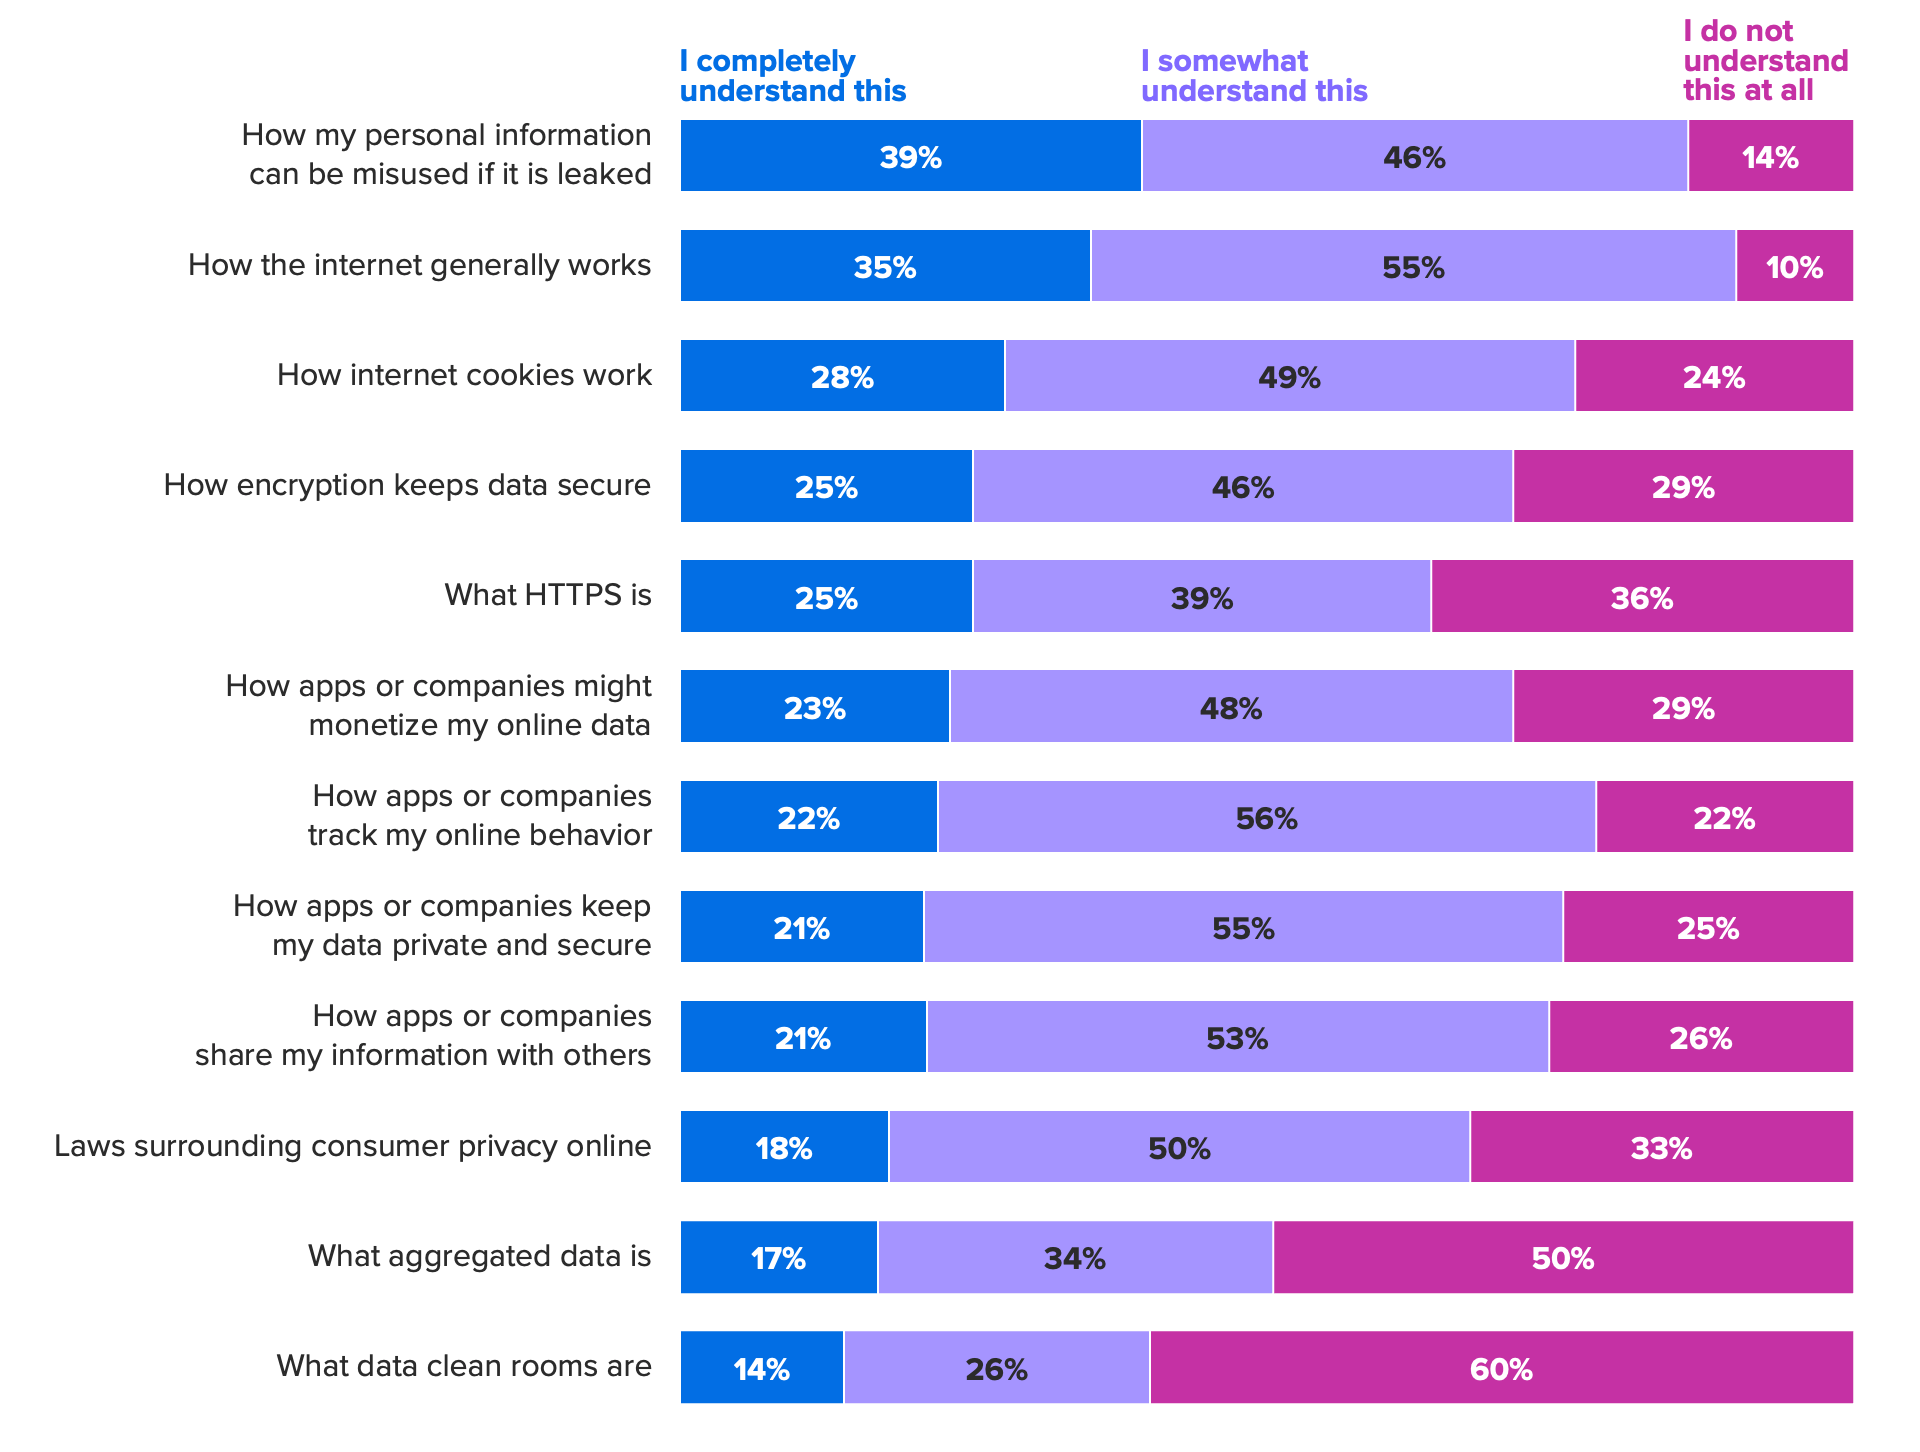 Bar chart of consumers' understanding of how data moves behind the scenes, showing the vast majority of respondents do not fully understand how data is transferred.